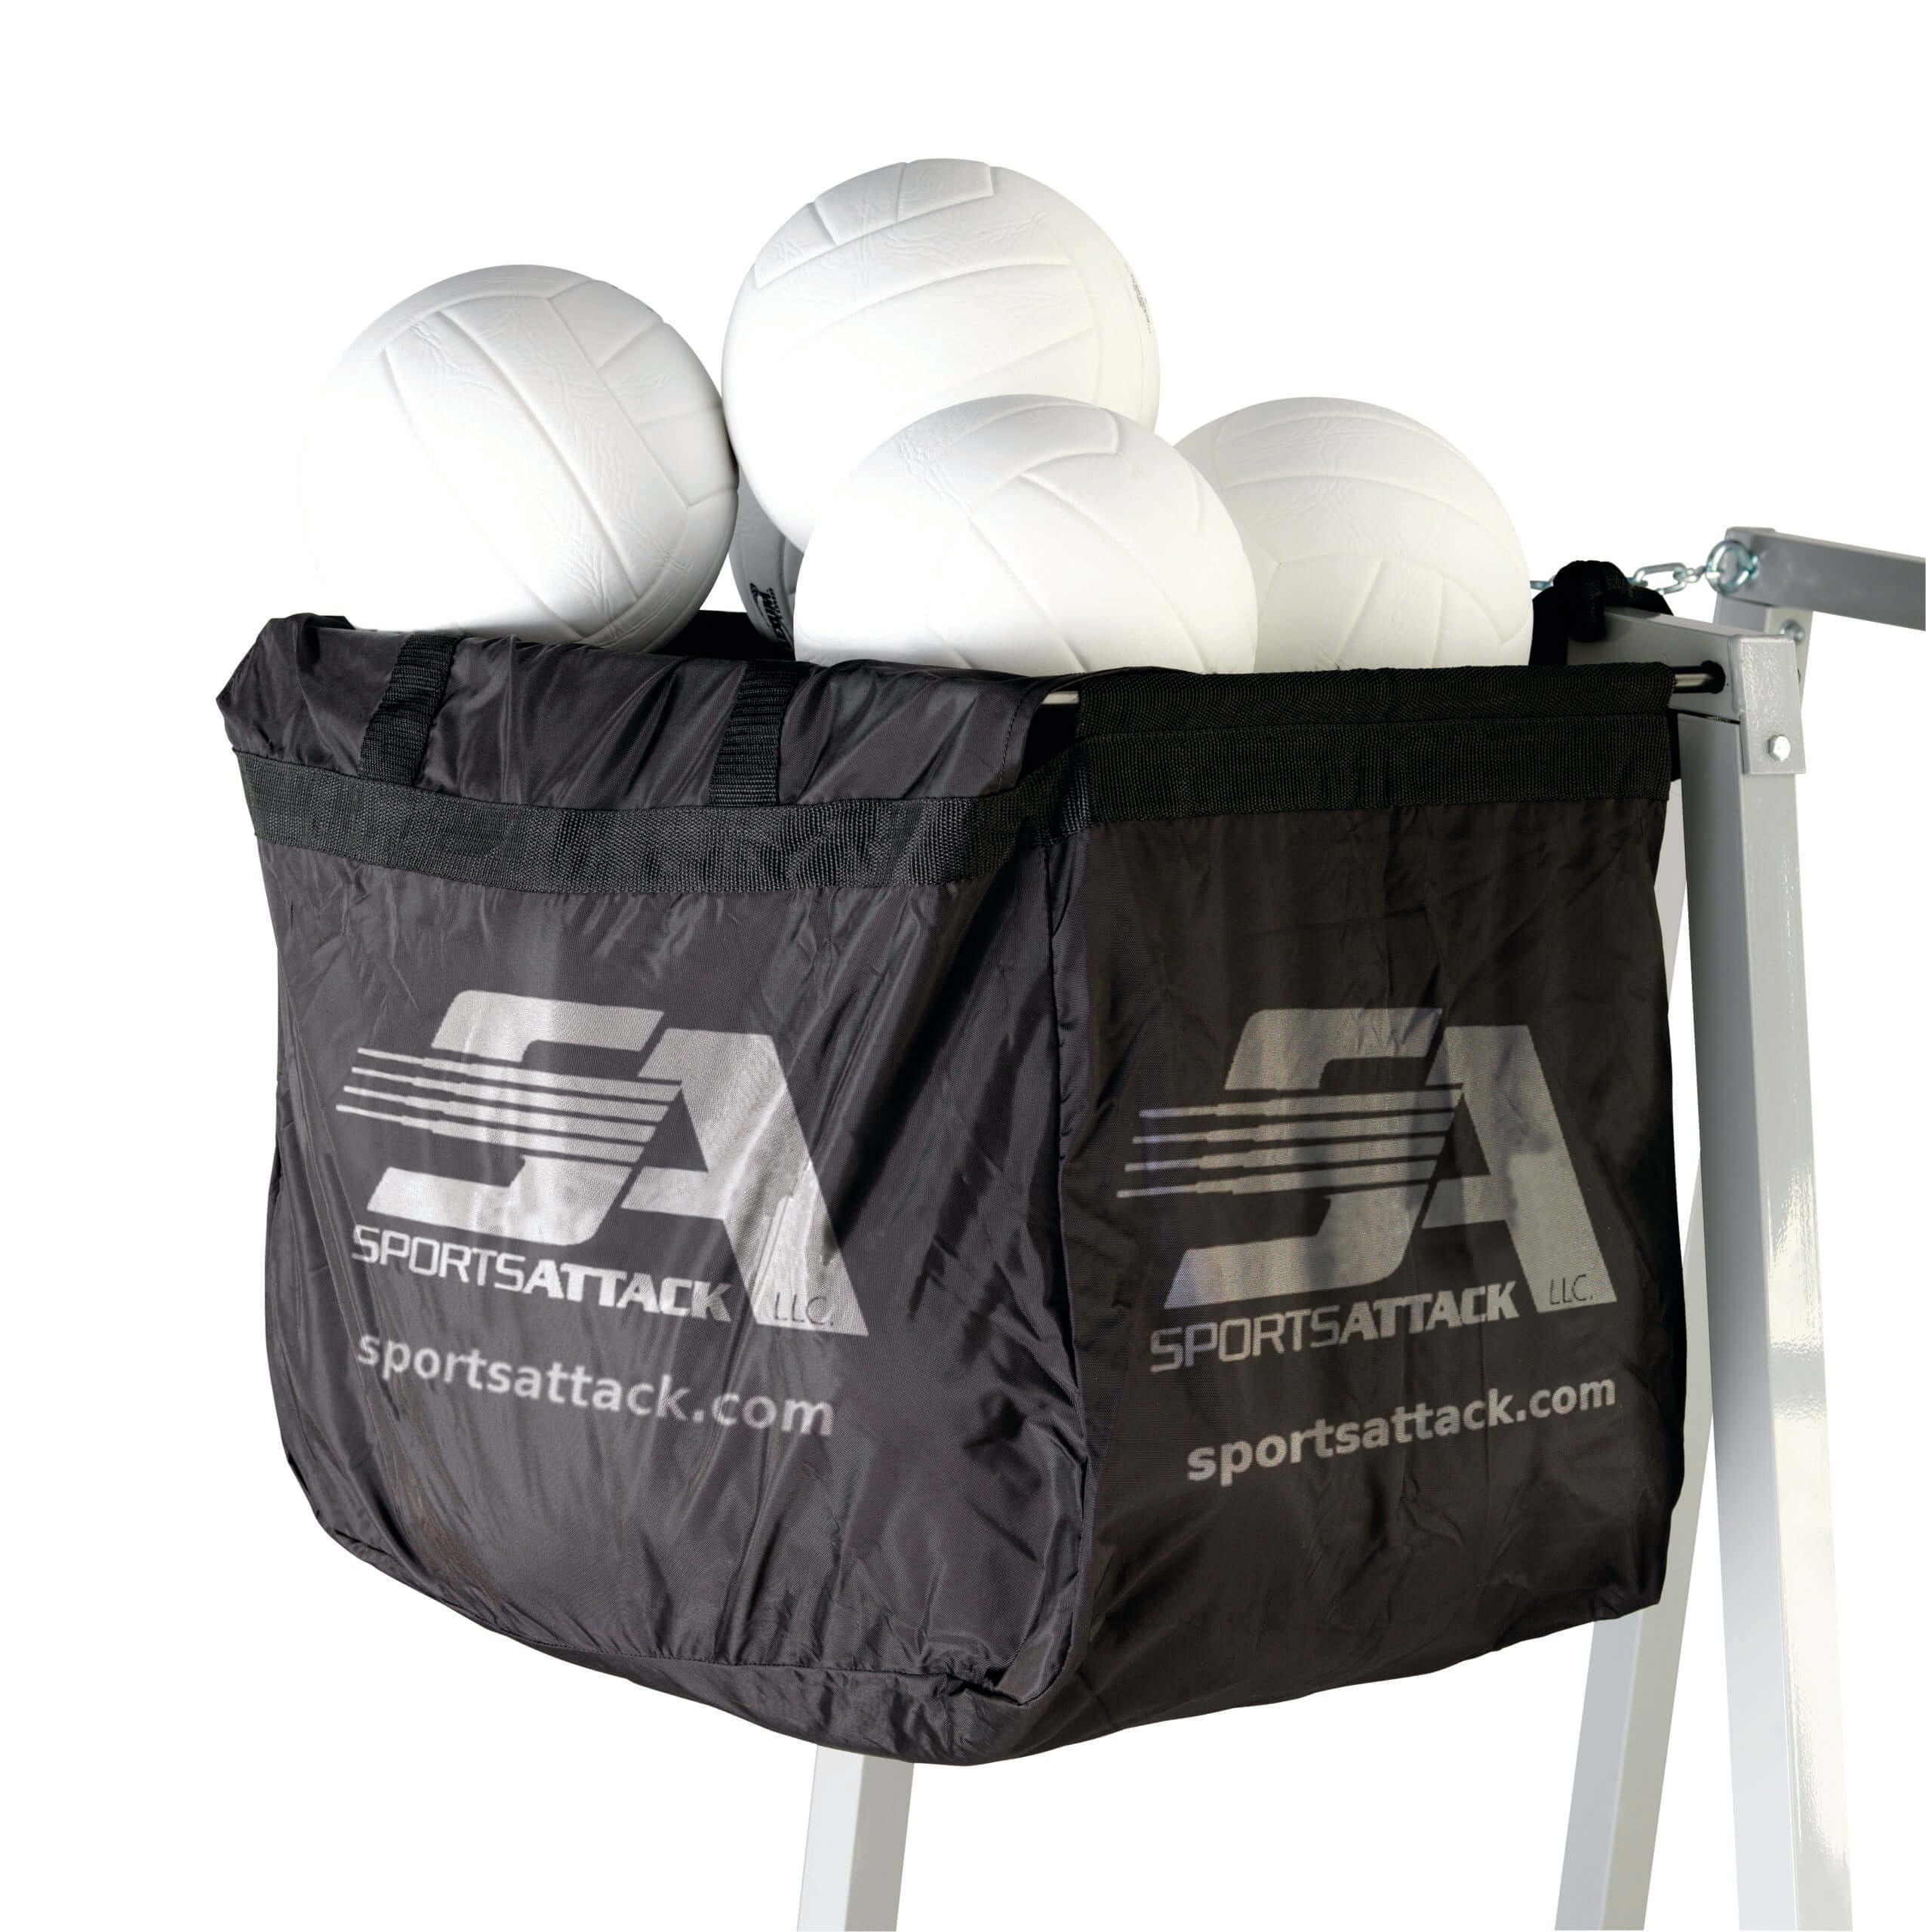 Attack II Volleyball Machine - Sports Attack - Precise Repetition Volleyball Training - Pitch Machine Pros